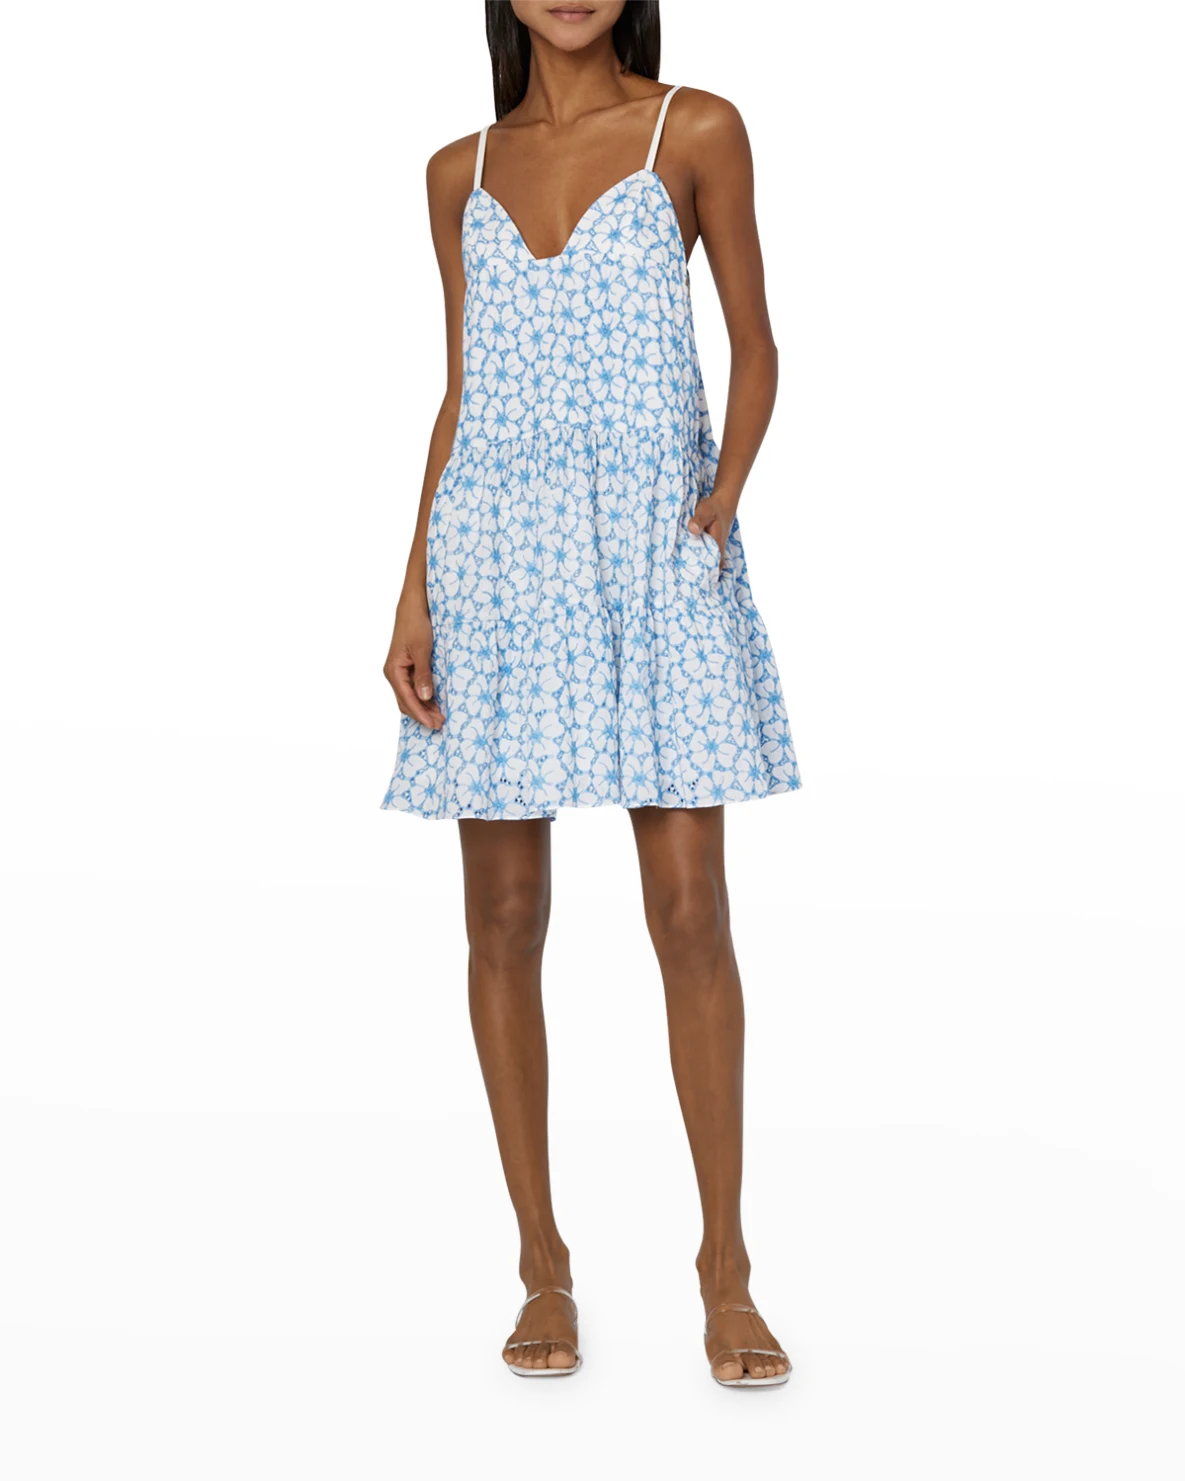 Evelyn Tiered Eyelet Dress
